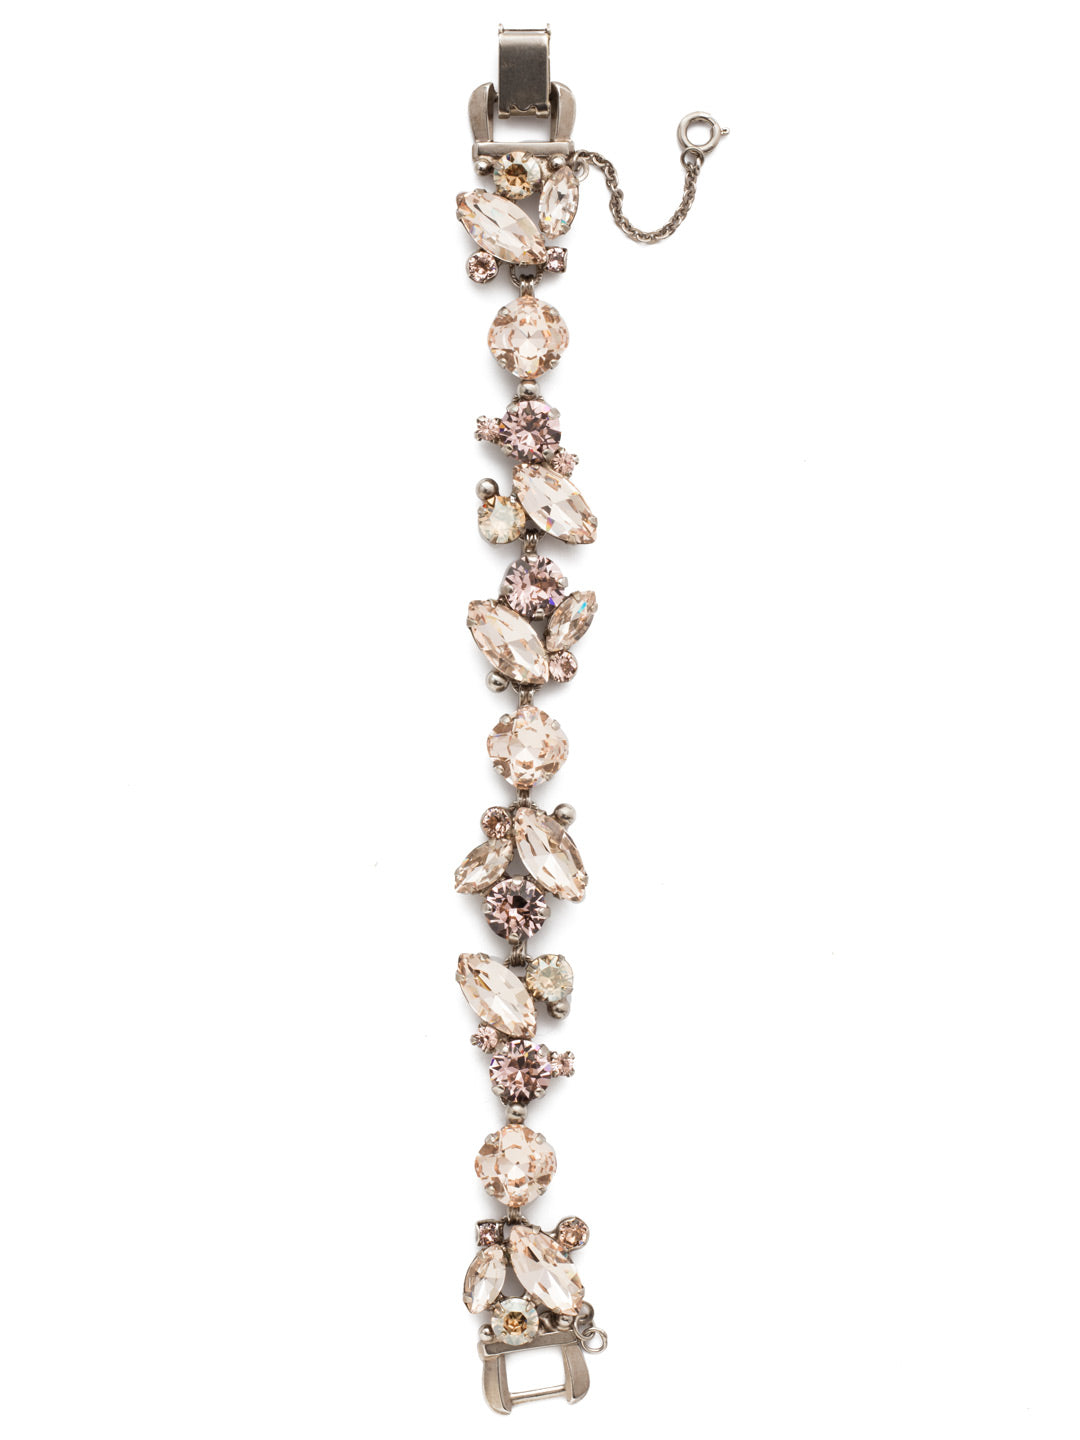 Radiant Vine Tennis Bracelet - BDN51ASSBL - <p>Round and navette cut crystals are set in a striking vine pattern in this statement-making style. From Sorrelli's Satin Blush collection in our Antique Silver-tone finish.</p>